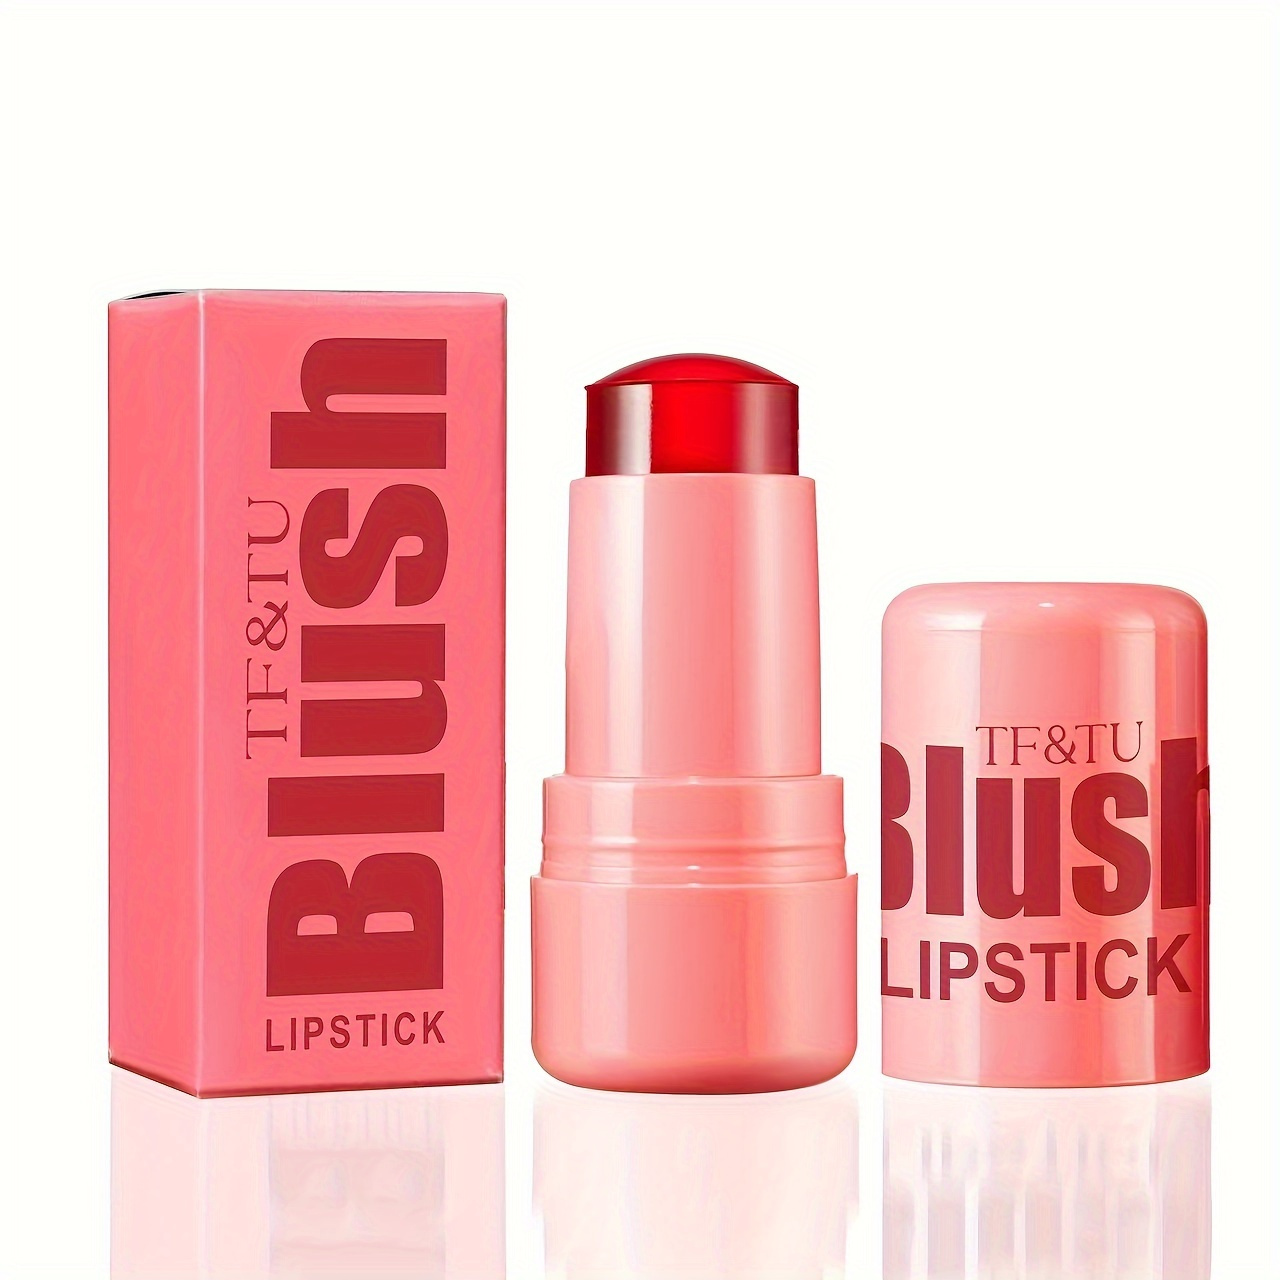 

4 Shades Blush Lipstick Stick, Natural Contour & Highlight, Dual-use Cheek And Lip Tint, Jelly Bouncy Texture, Long-lasting Color, Cosmetic Makeup